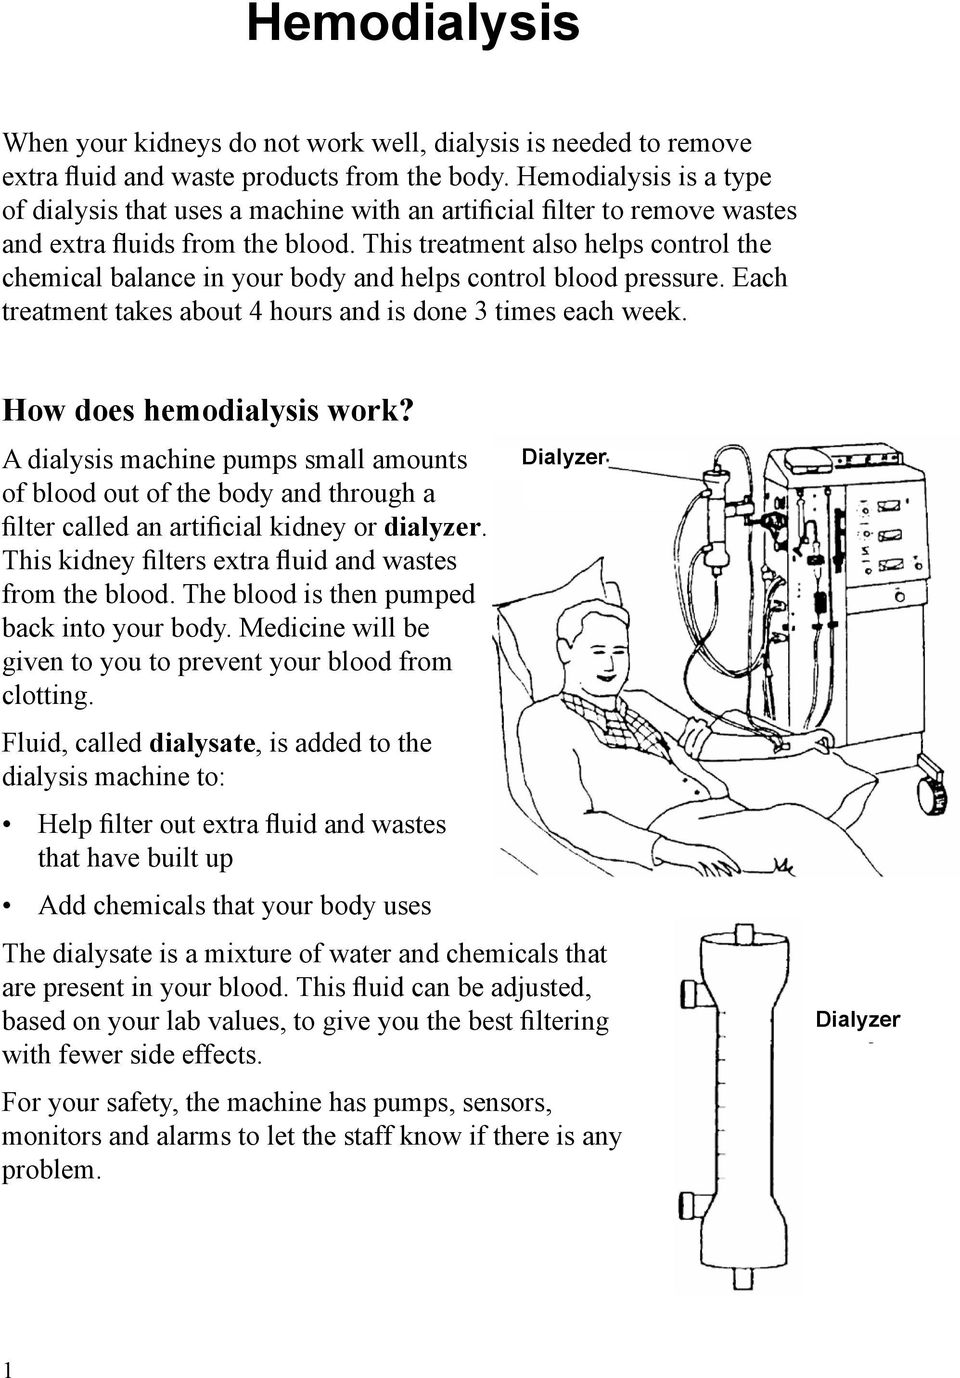 This treatment also helps control the chemical balance in your body and helps control blood pressure. Each treatment takes about 4 hours and is done 3 times each week. How does hemodialysis work?